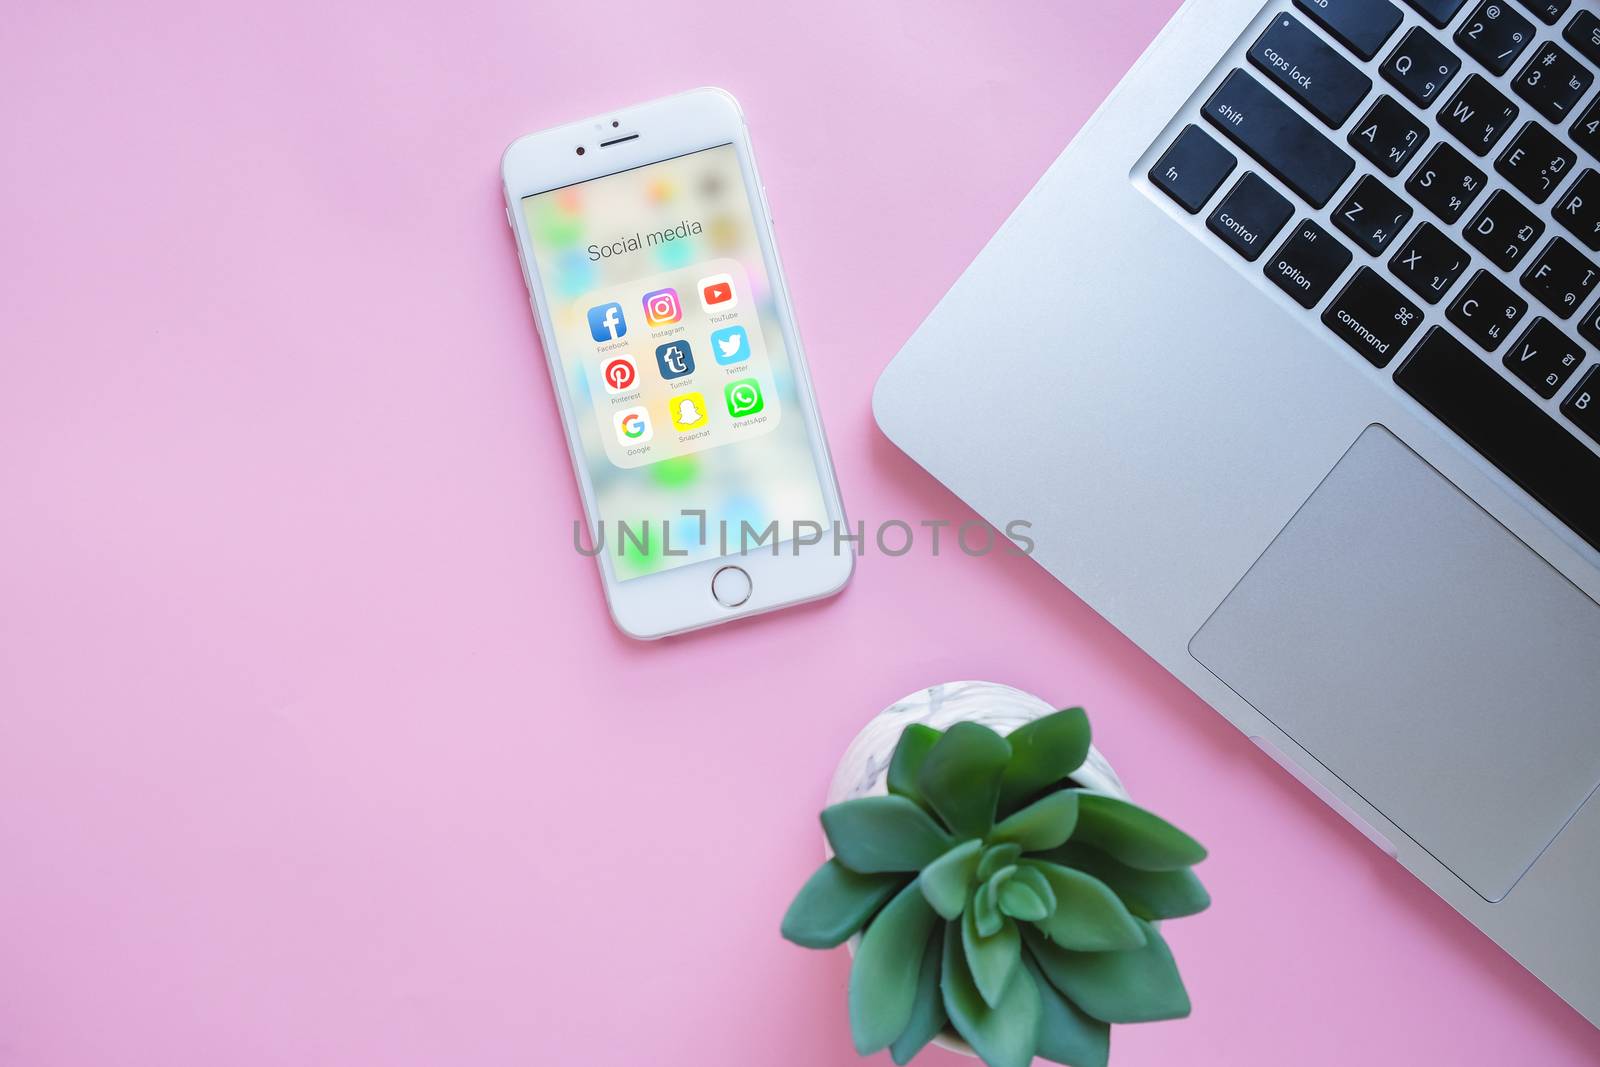 BANGKOK, THAILAND - NOVEMBER 28, 2016:  Group of Popular Social networks icons showing on Apple iPhone 6s screen with laptop and green plant on pink background, Social media are most popular tool for communication.